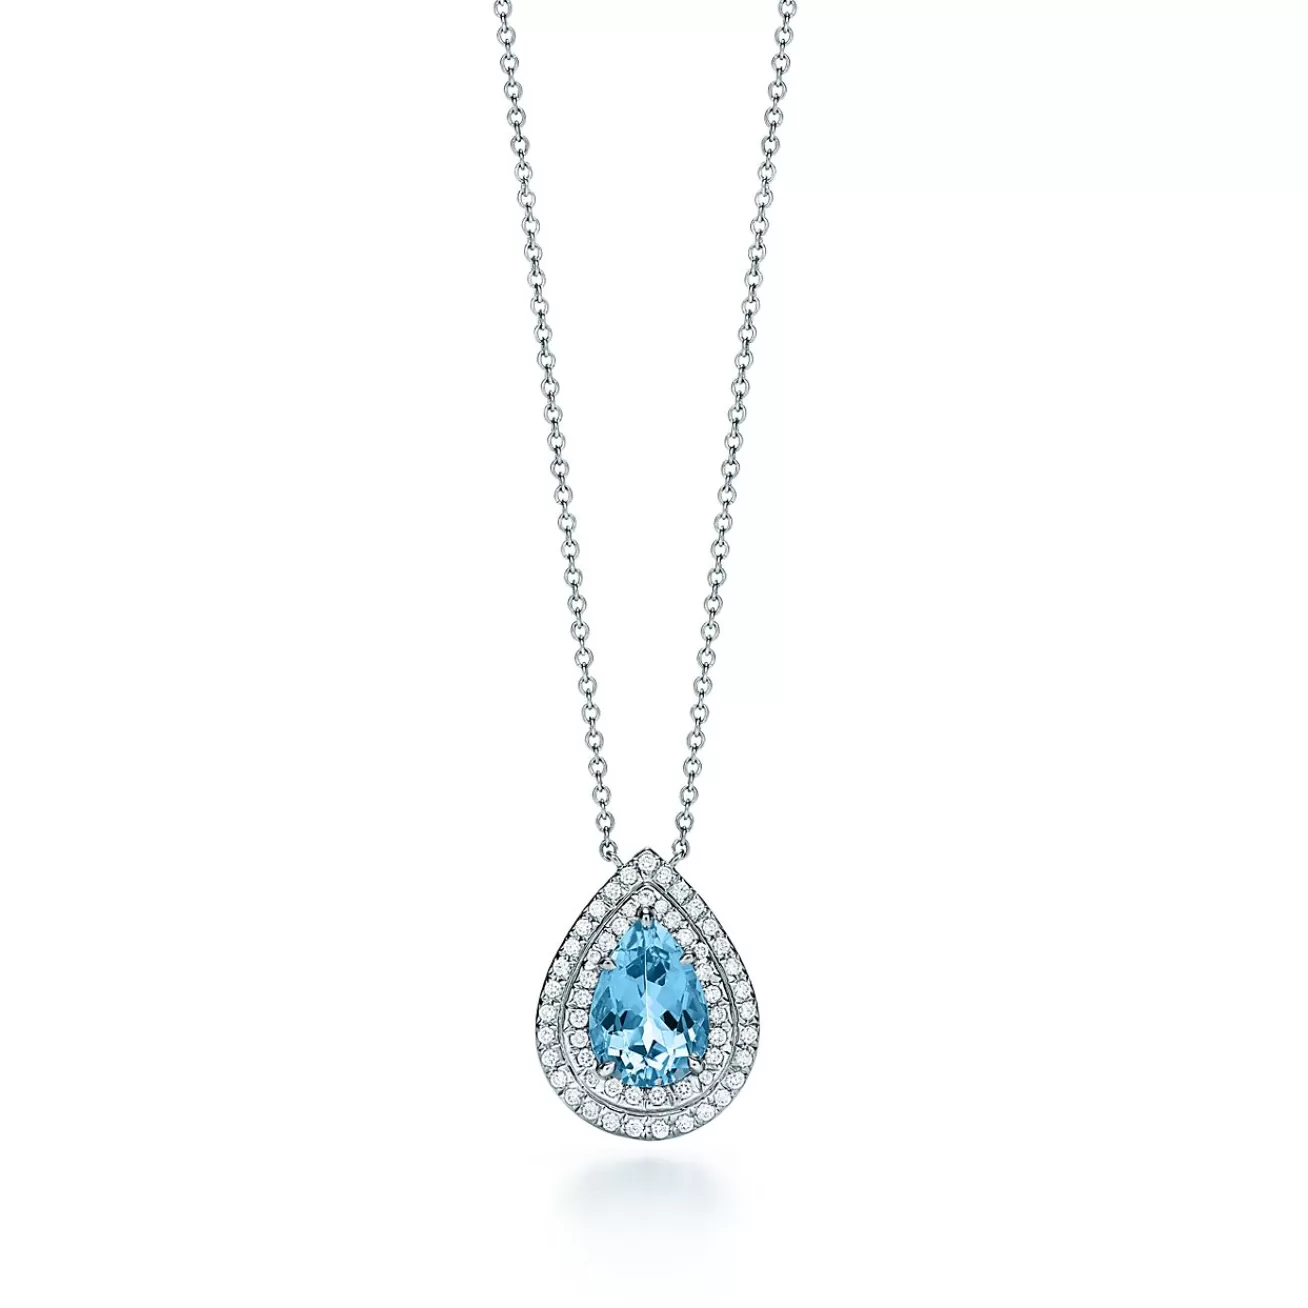 Tiffany & Co. Tiffany Soleste® pendant in platinum with an aquamarine and diamonds. | ^ Necklaces & Pendants | Gifts for Her